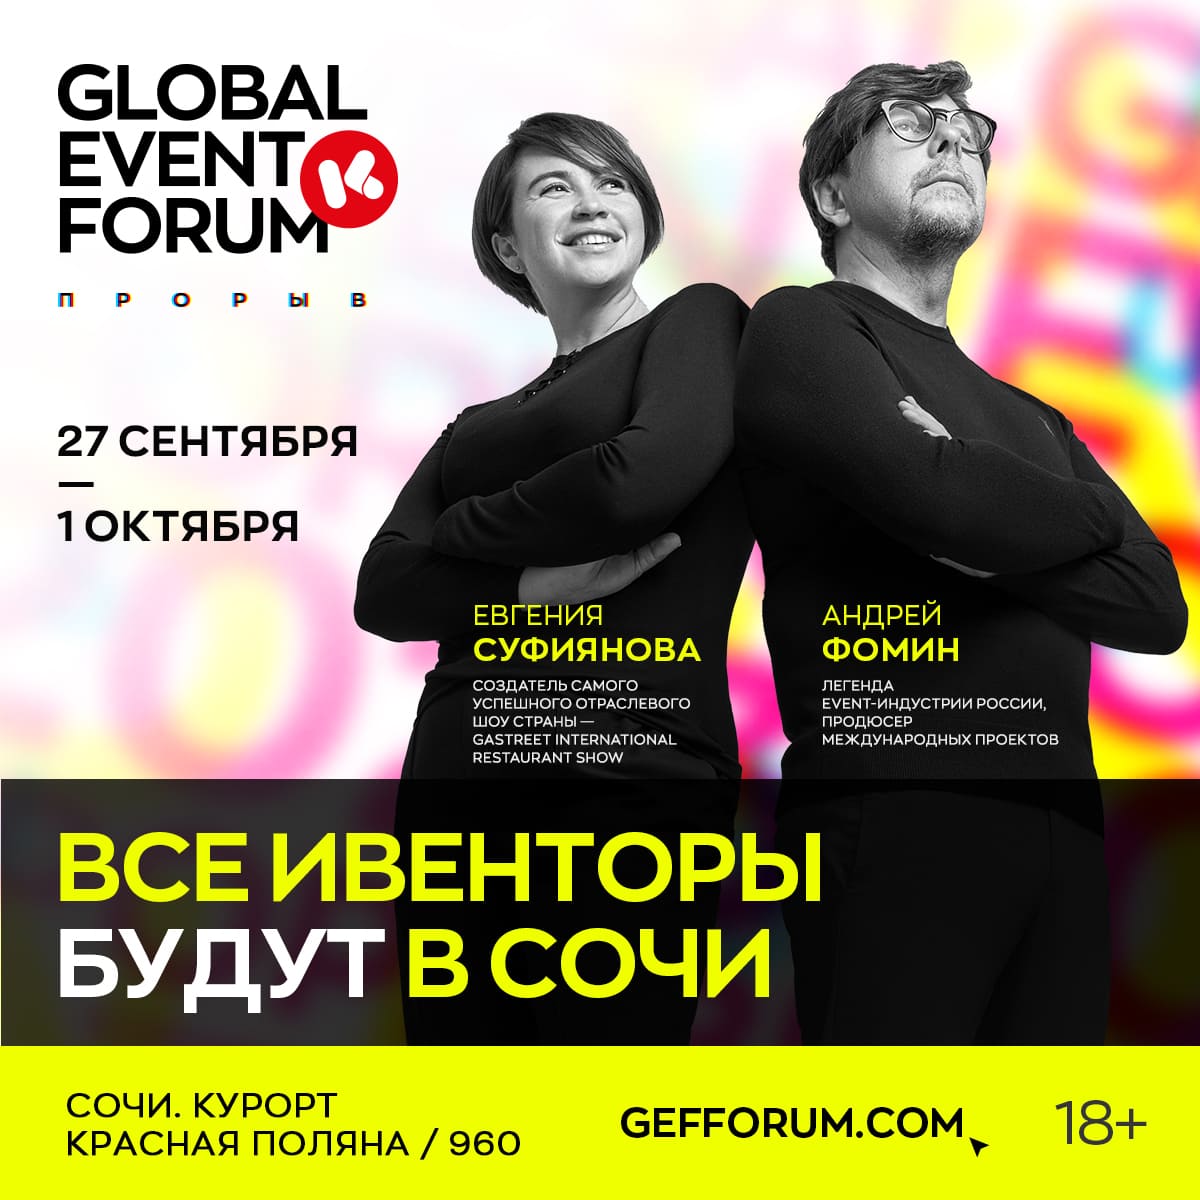 Global event forum